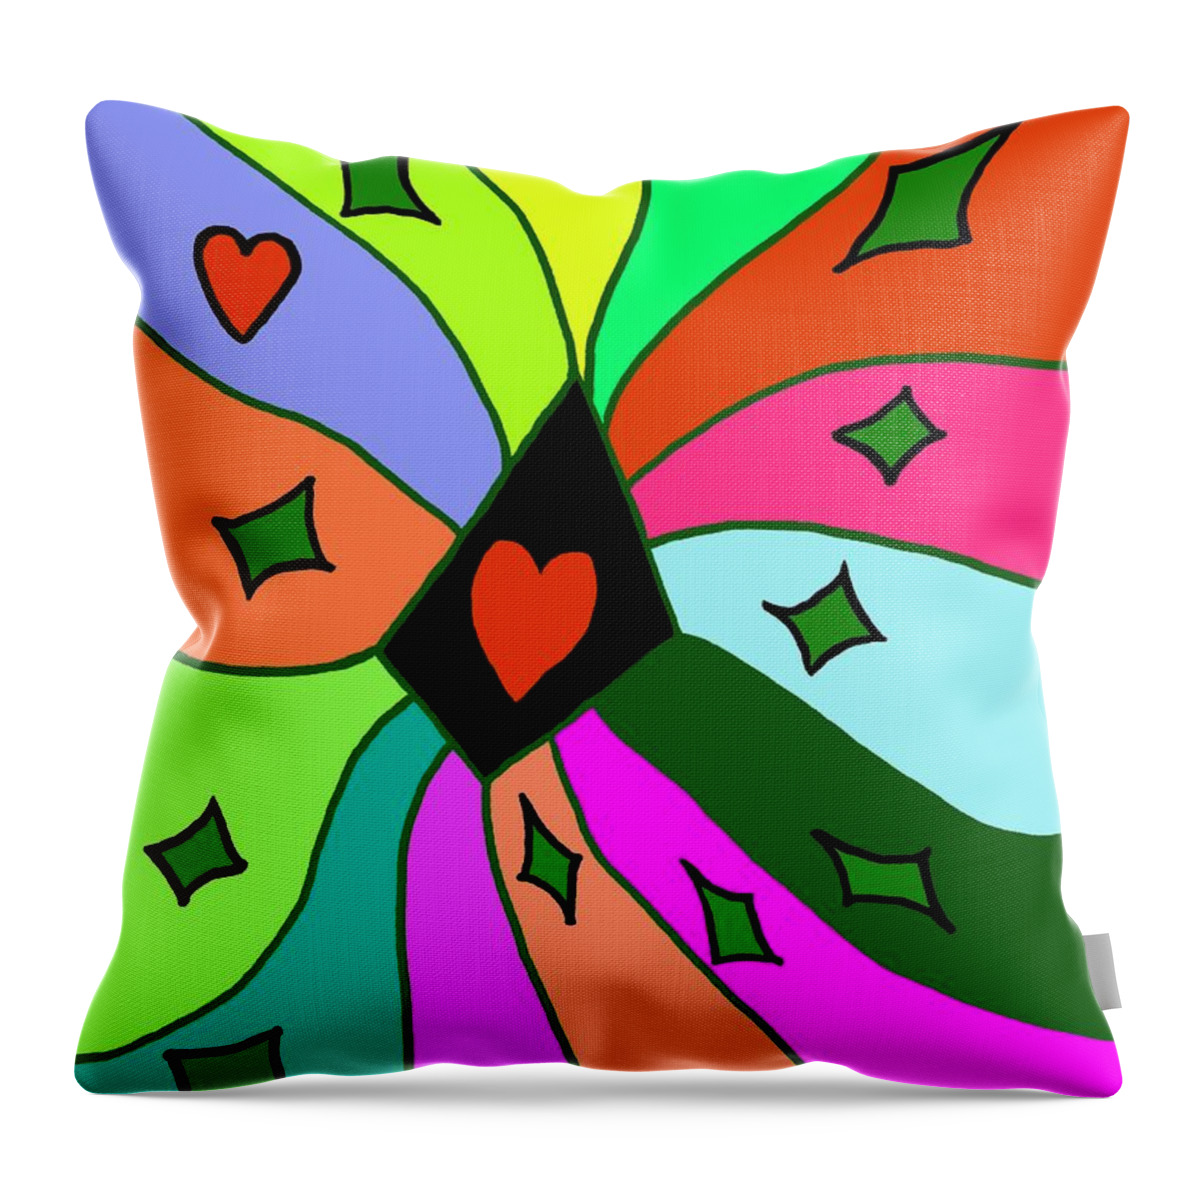 Hearts Throw Pillow featuring the digital art Diamond Dimensional by Laura Smith